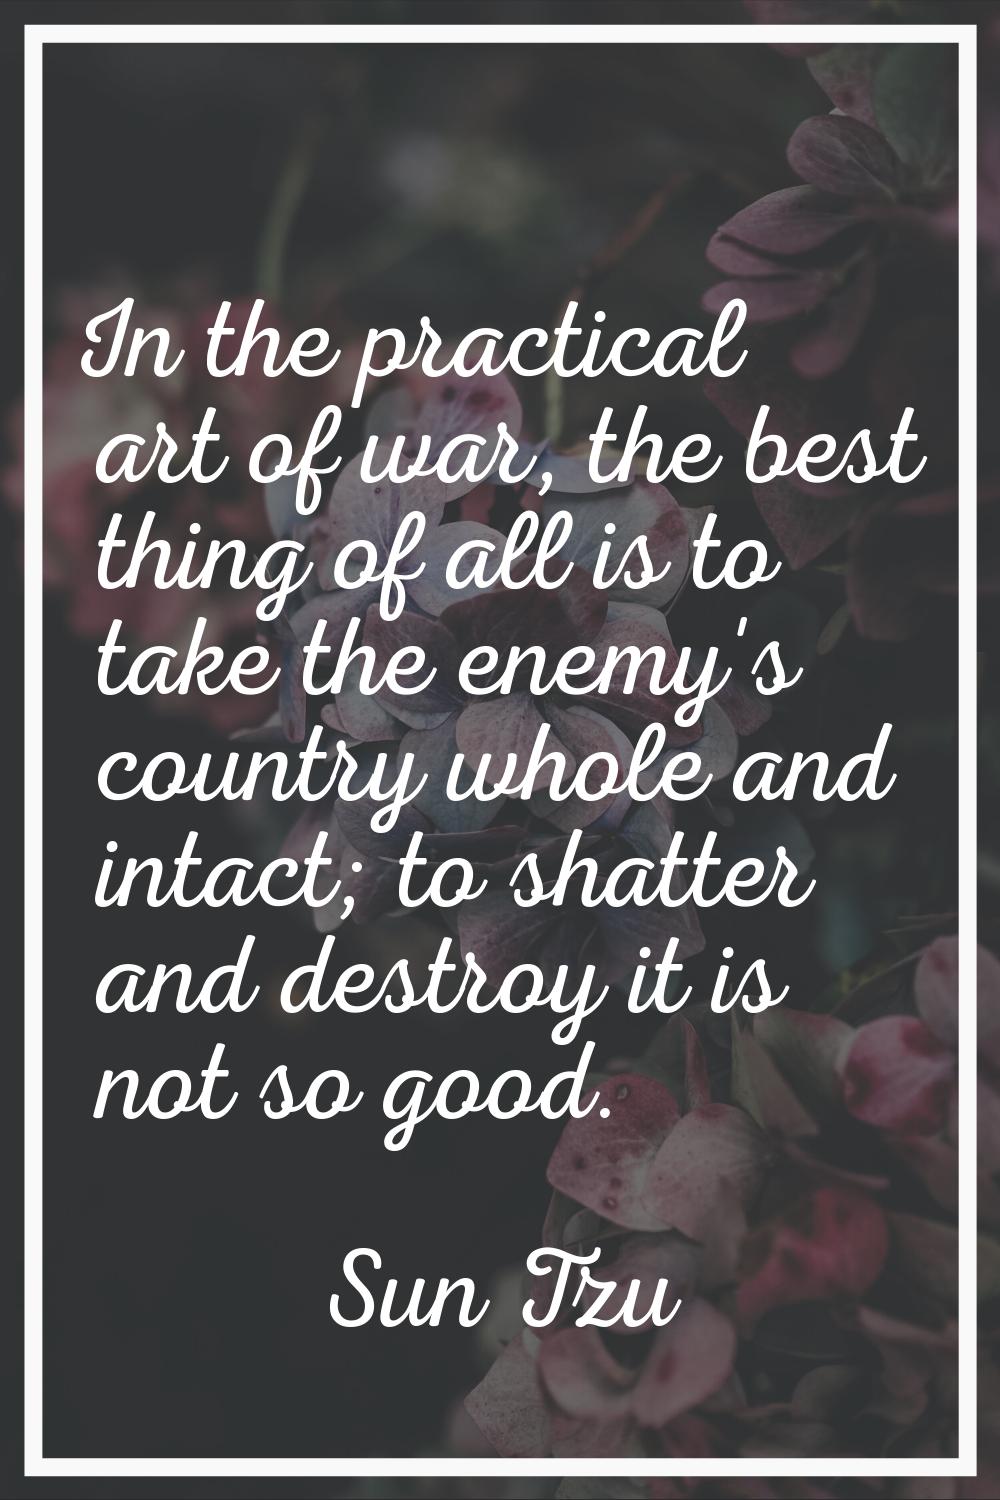 In the practical art of war, the best thing of all is to take the enemy's country whole and intact;